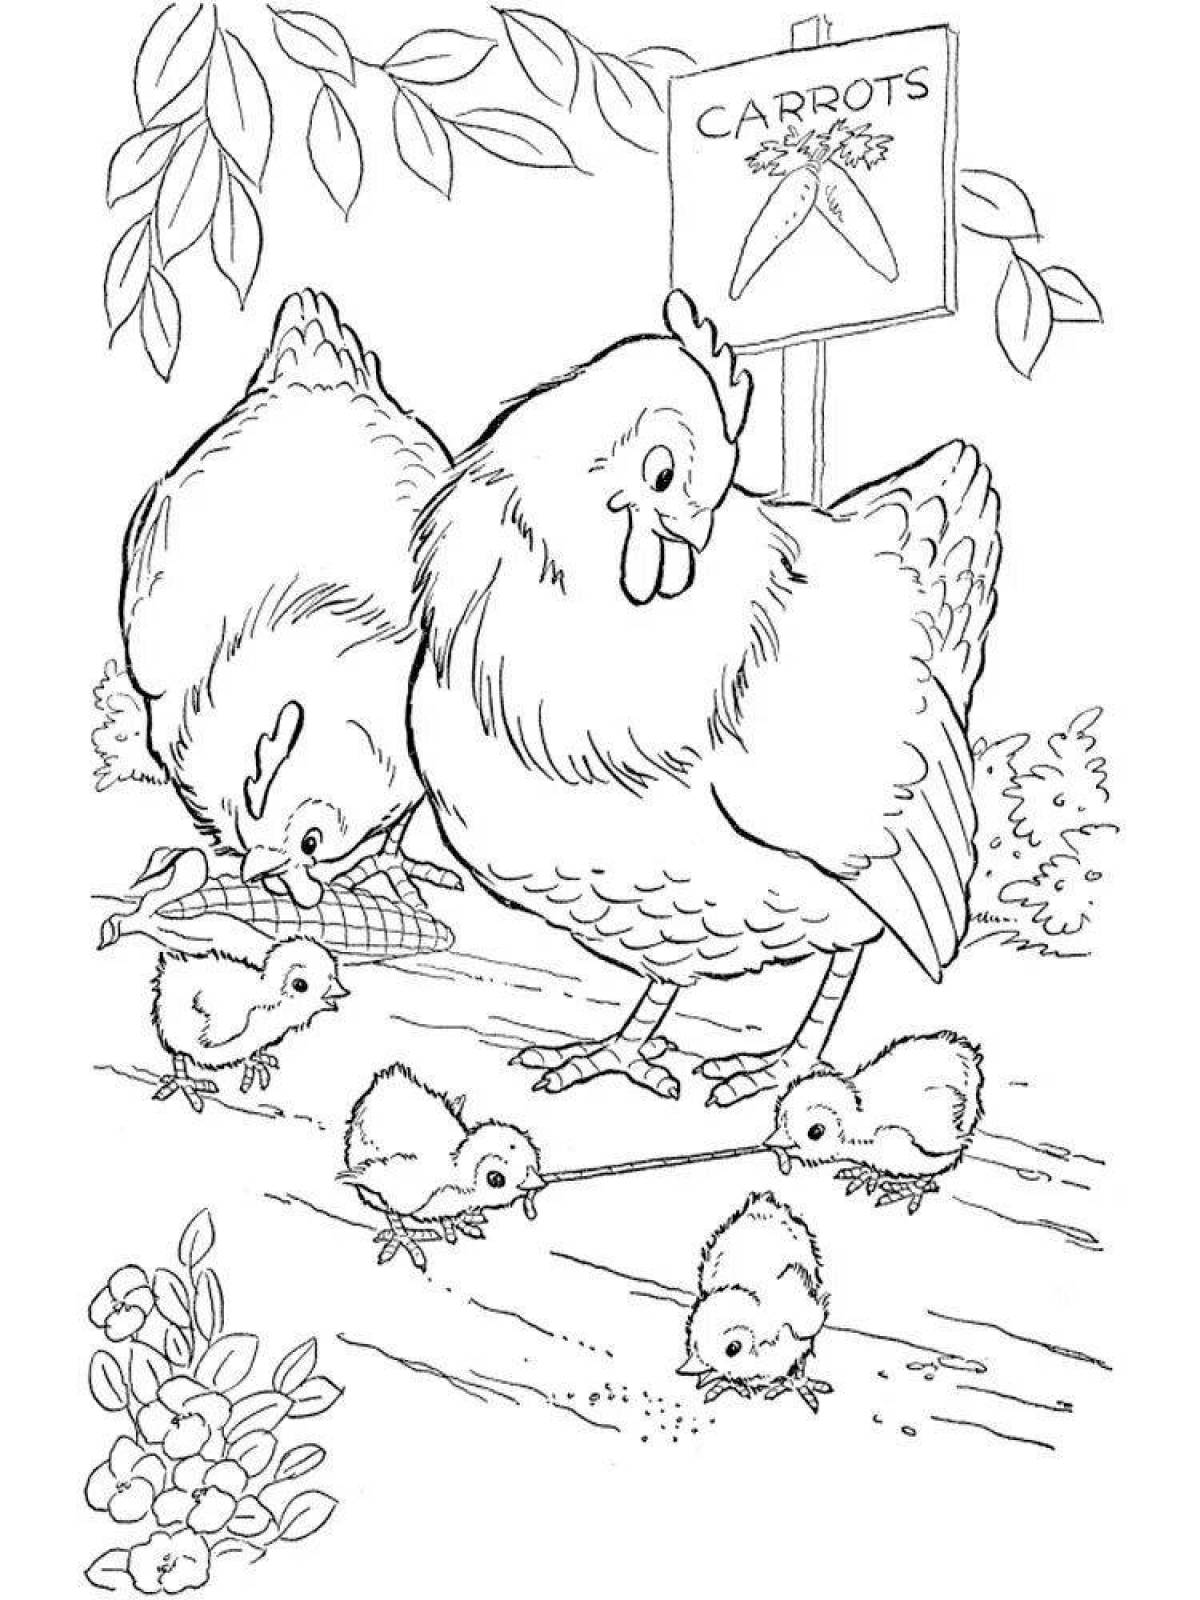 Hen with chicks #5